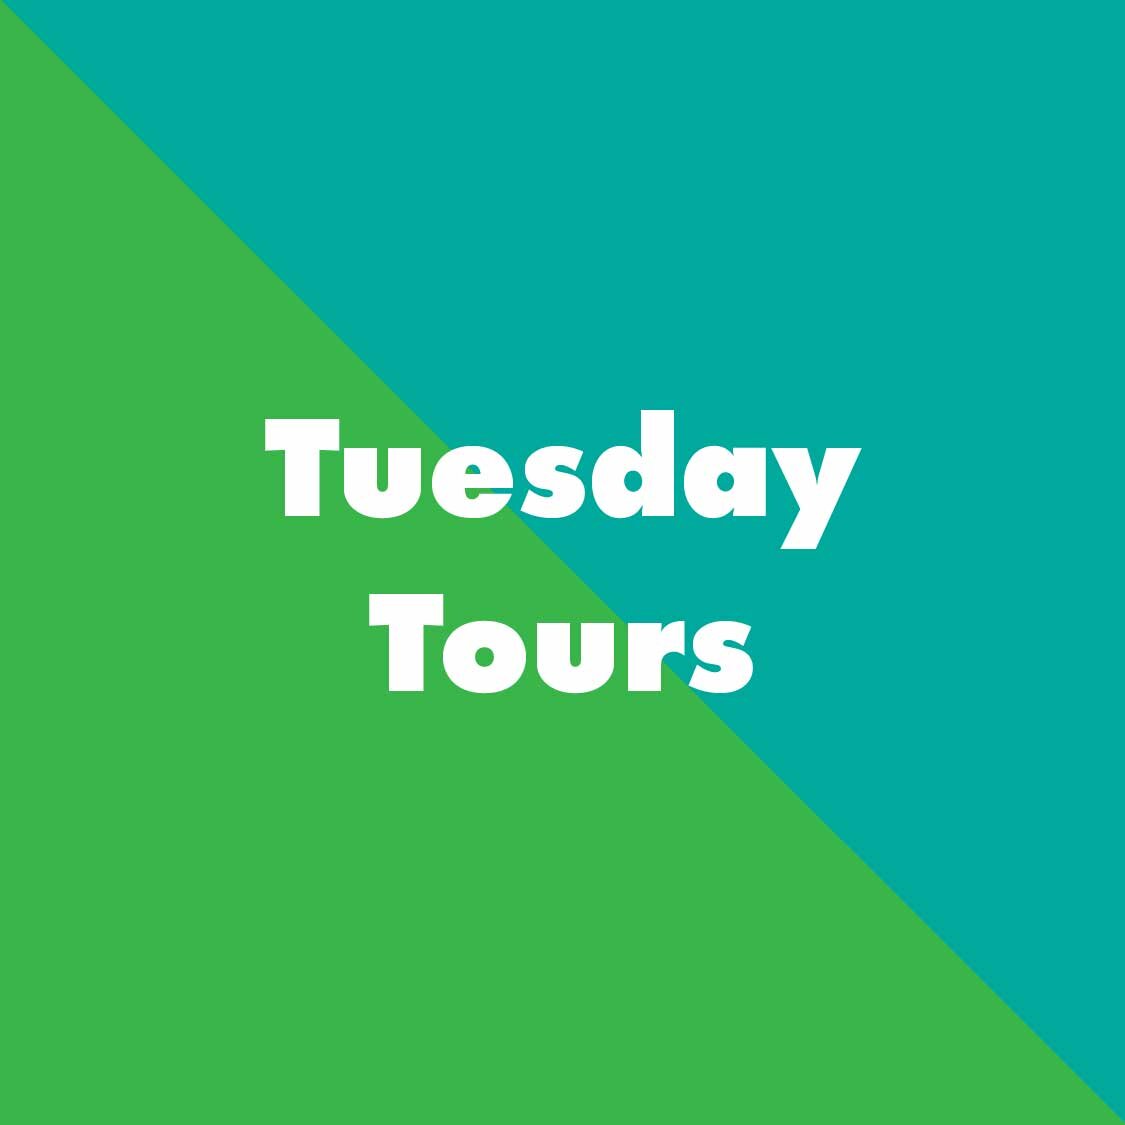 Tuesday Tours Graphic-20.jpg